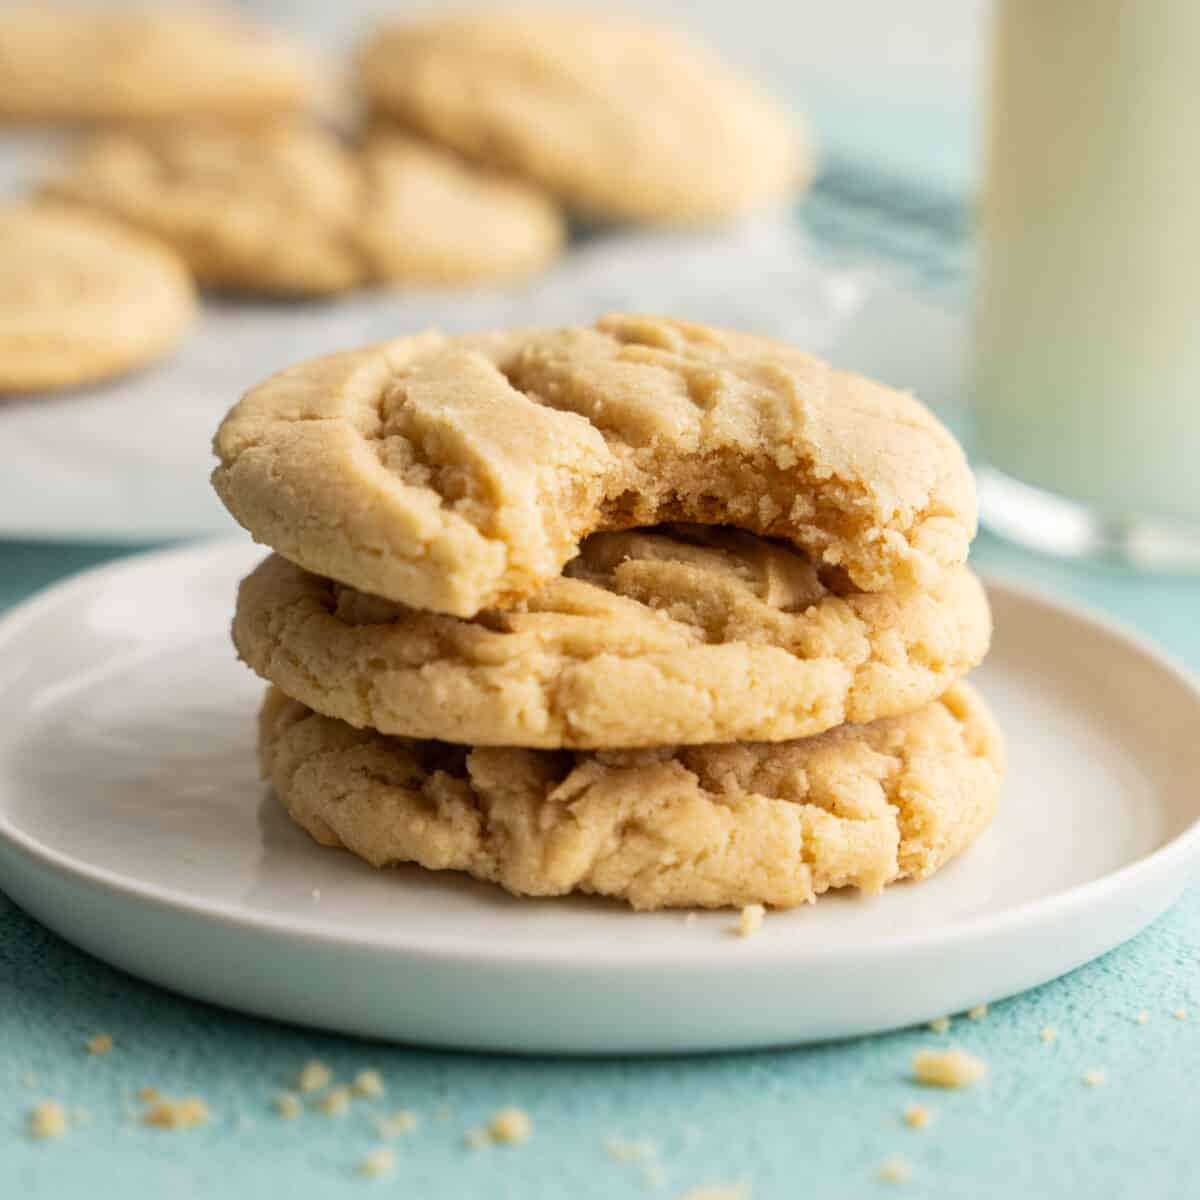 Three cookies stacked on a plate with a bite out of the top one and more cookies behind on a cooling rack.